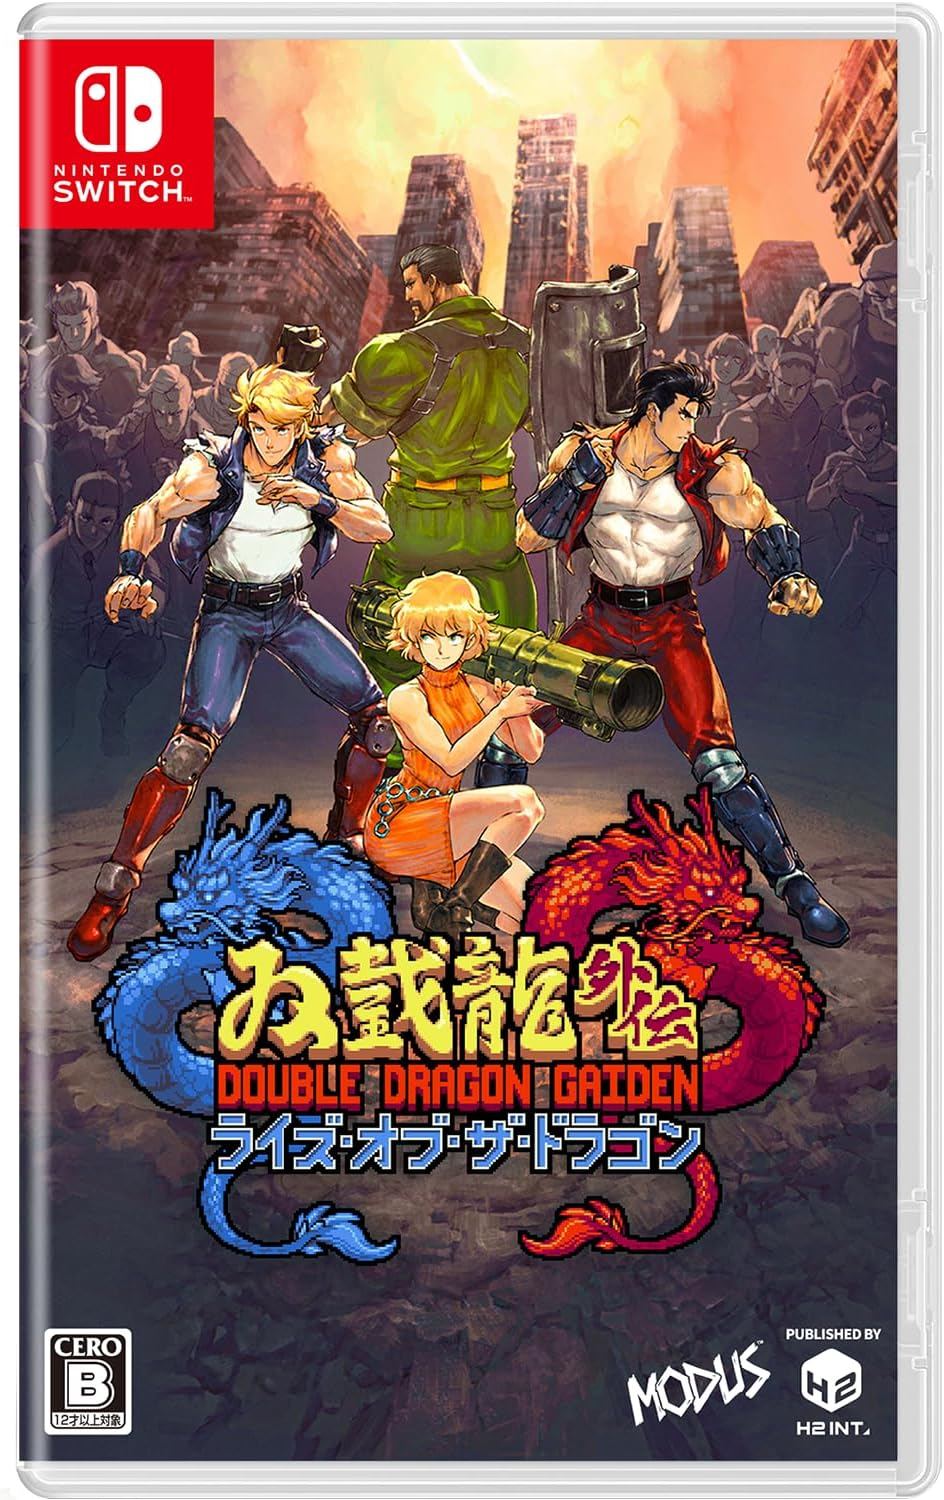 Double Dragon Gaiden: Rise of the Dragons Pre-order now!